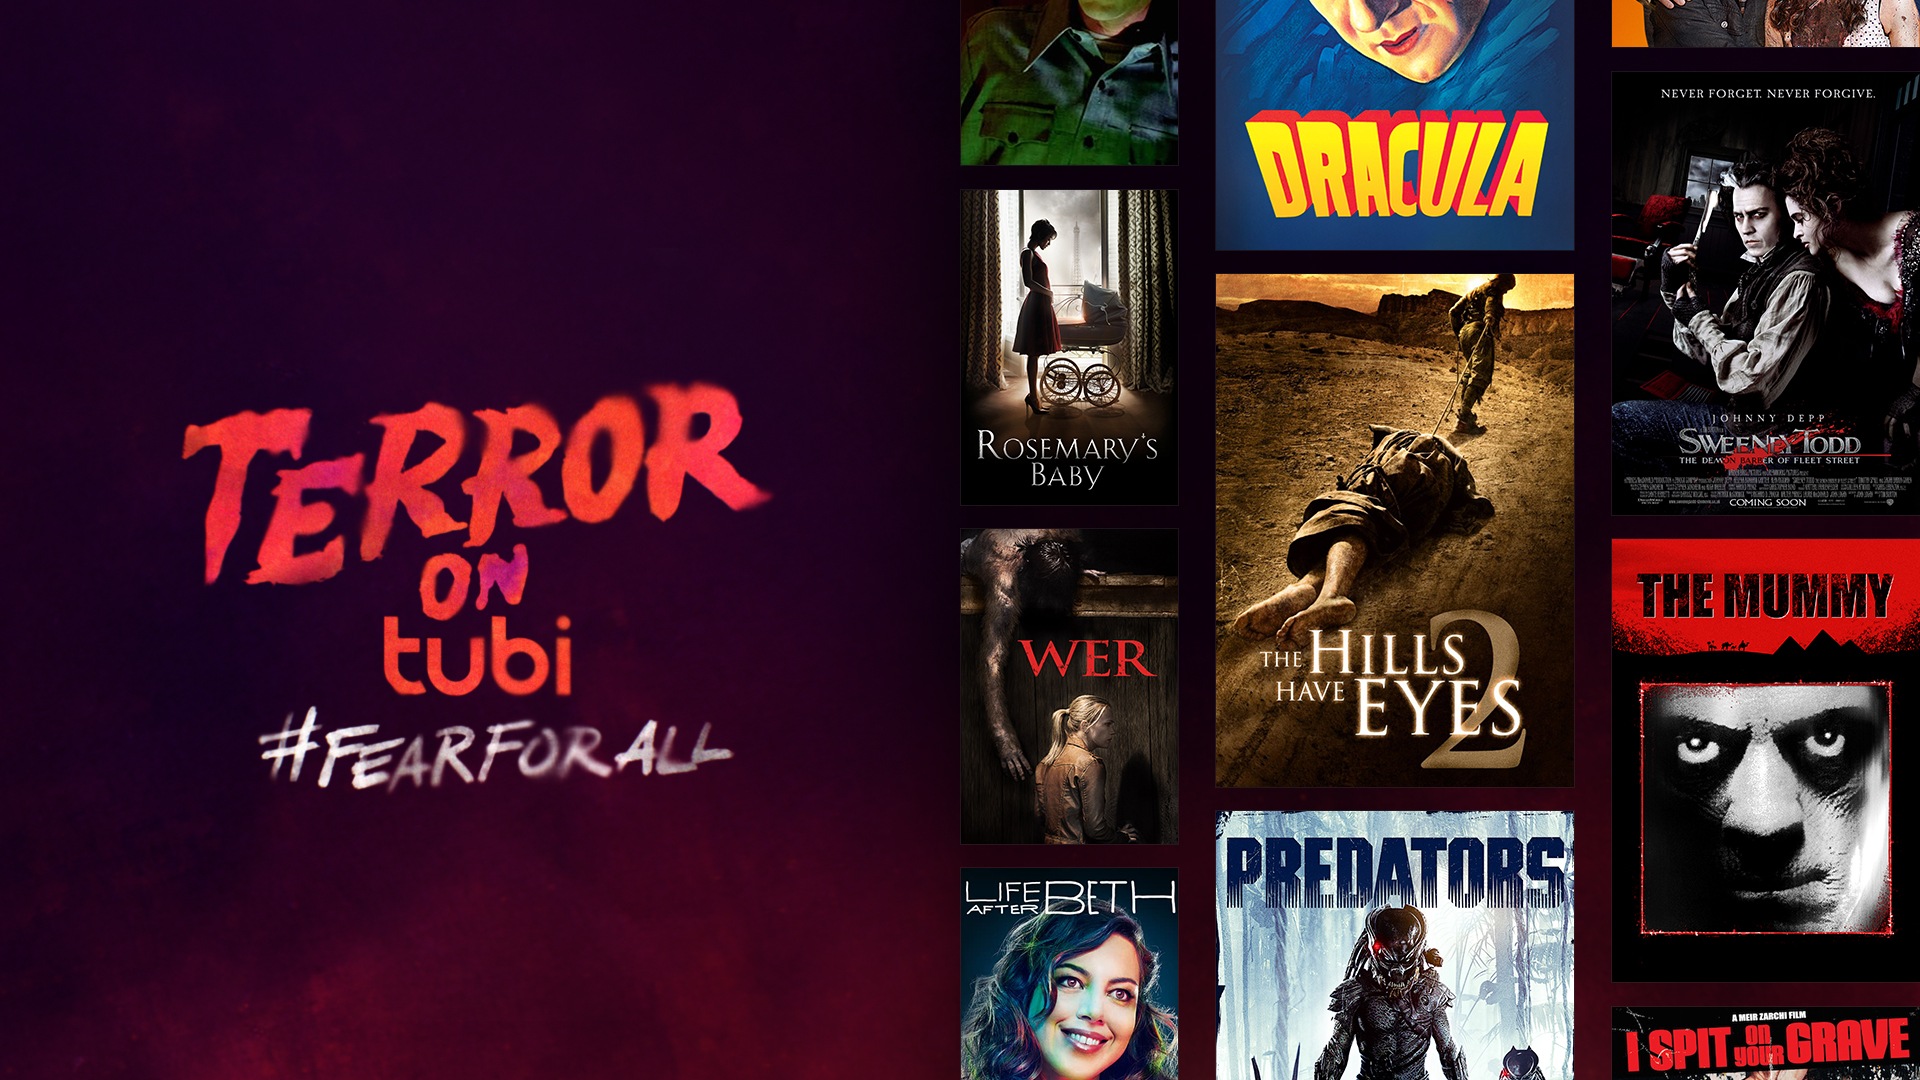 Tubi is Debuting Four New Originals and More for ‘Terror on Tubi’ in October 2021